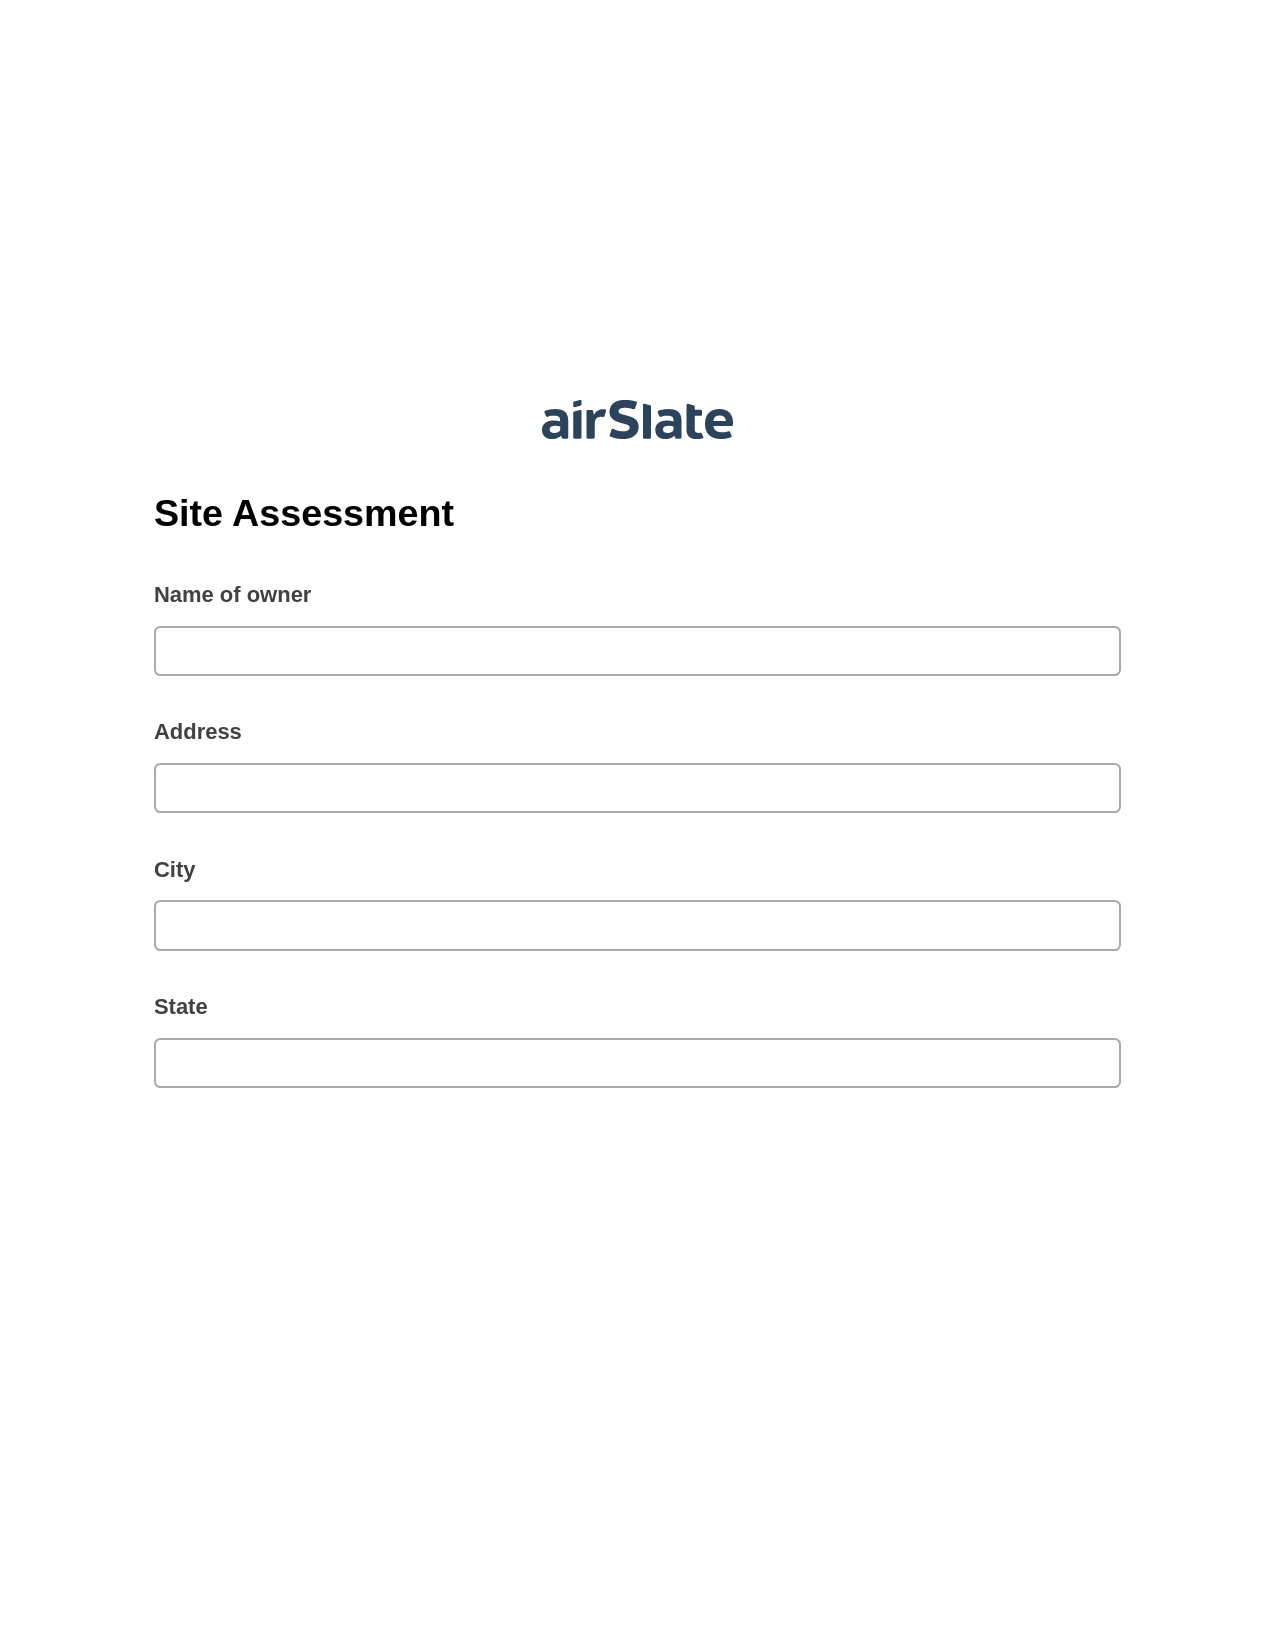 Site Assessment Pre-fill from Excel Spreadsheet Dropdown Options Bot, Remove Slate Bot, Export to Salesforce Bot